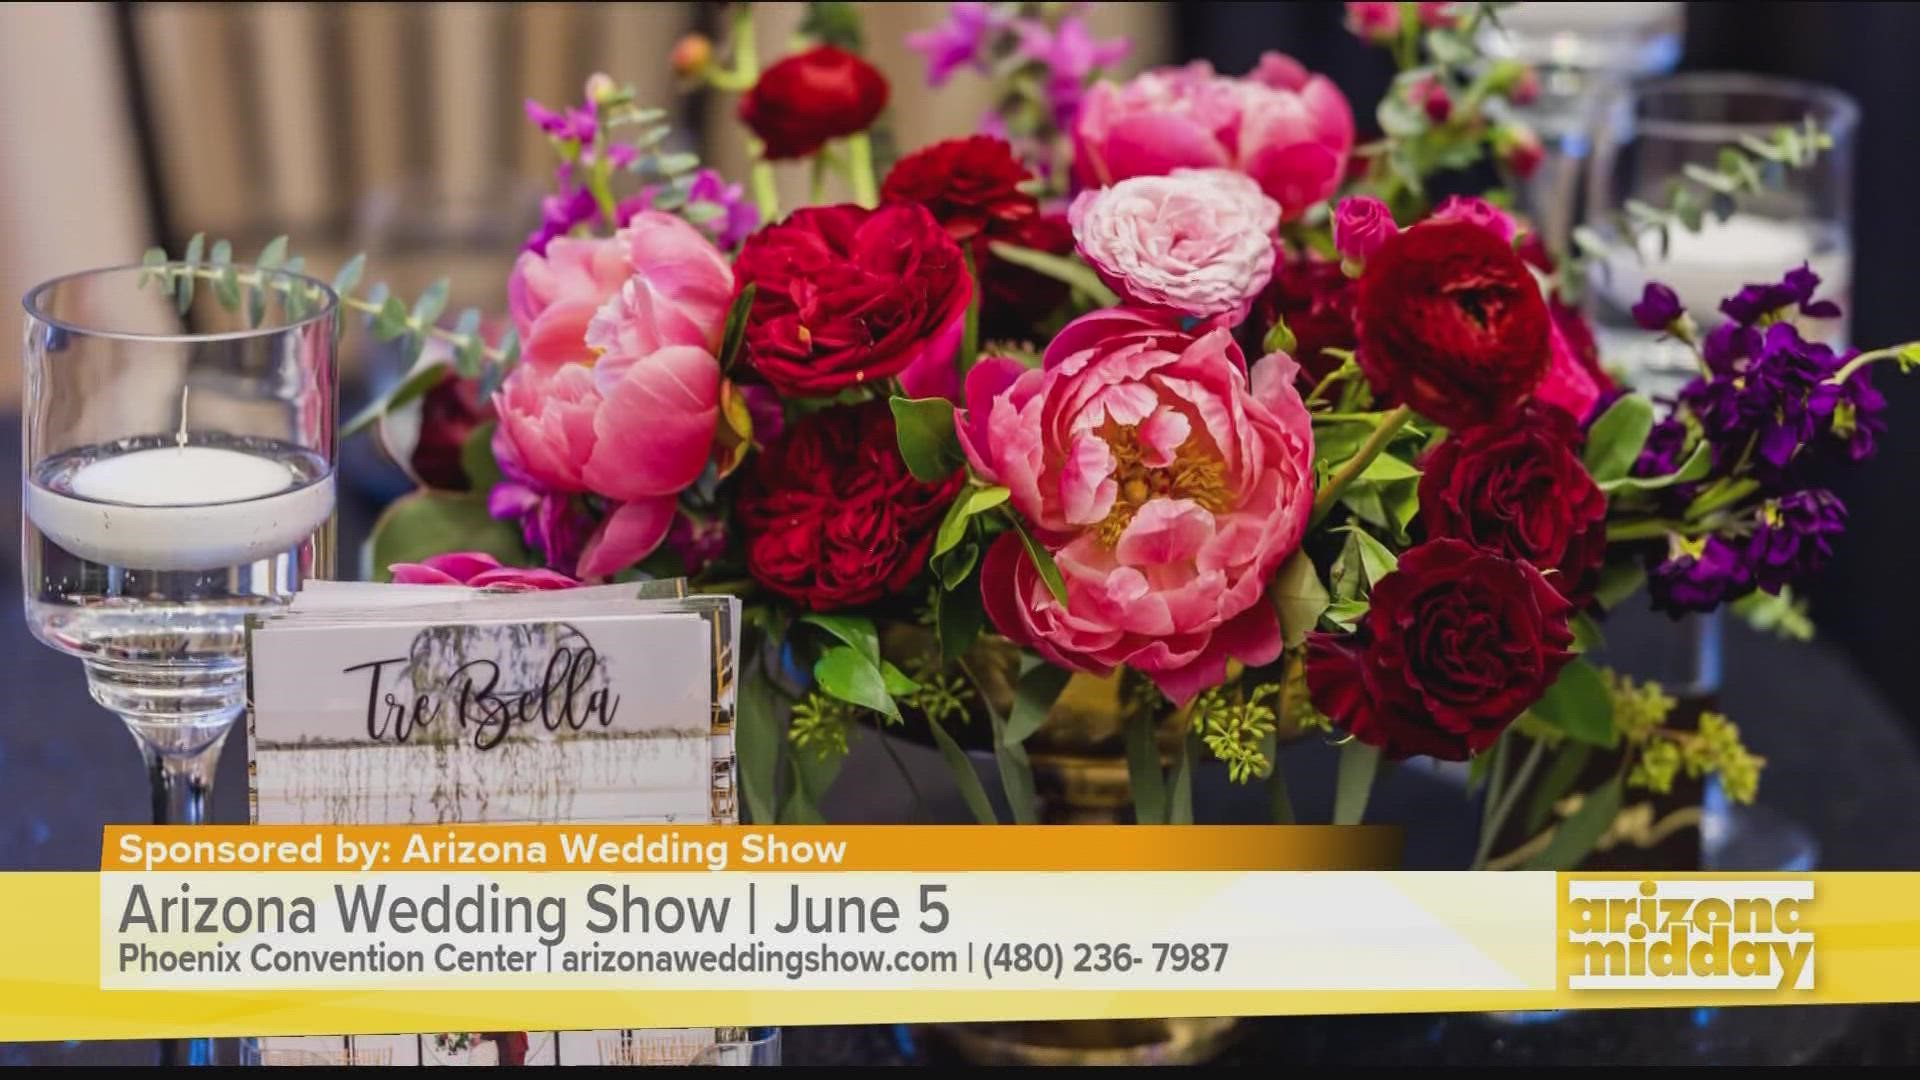 Stephanie Gatzionis, with The Arizona Wedding Show, gives us a look at the new additions we can look forward to happening June 5th at the Phoenix Convention Center